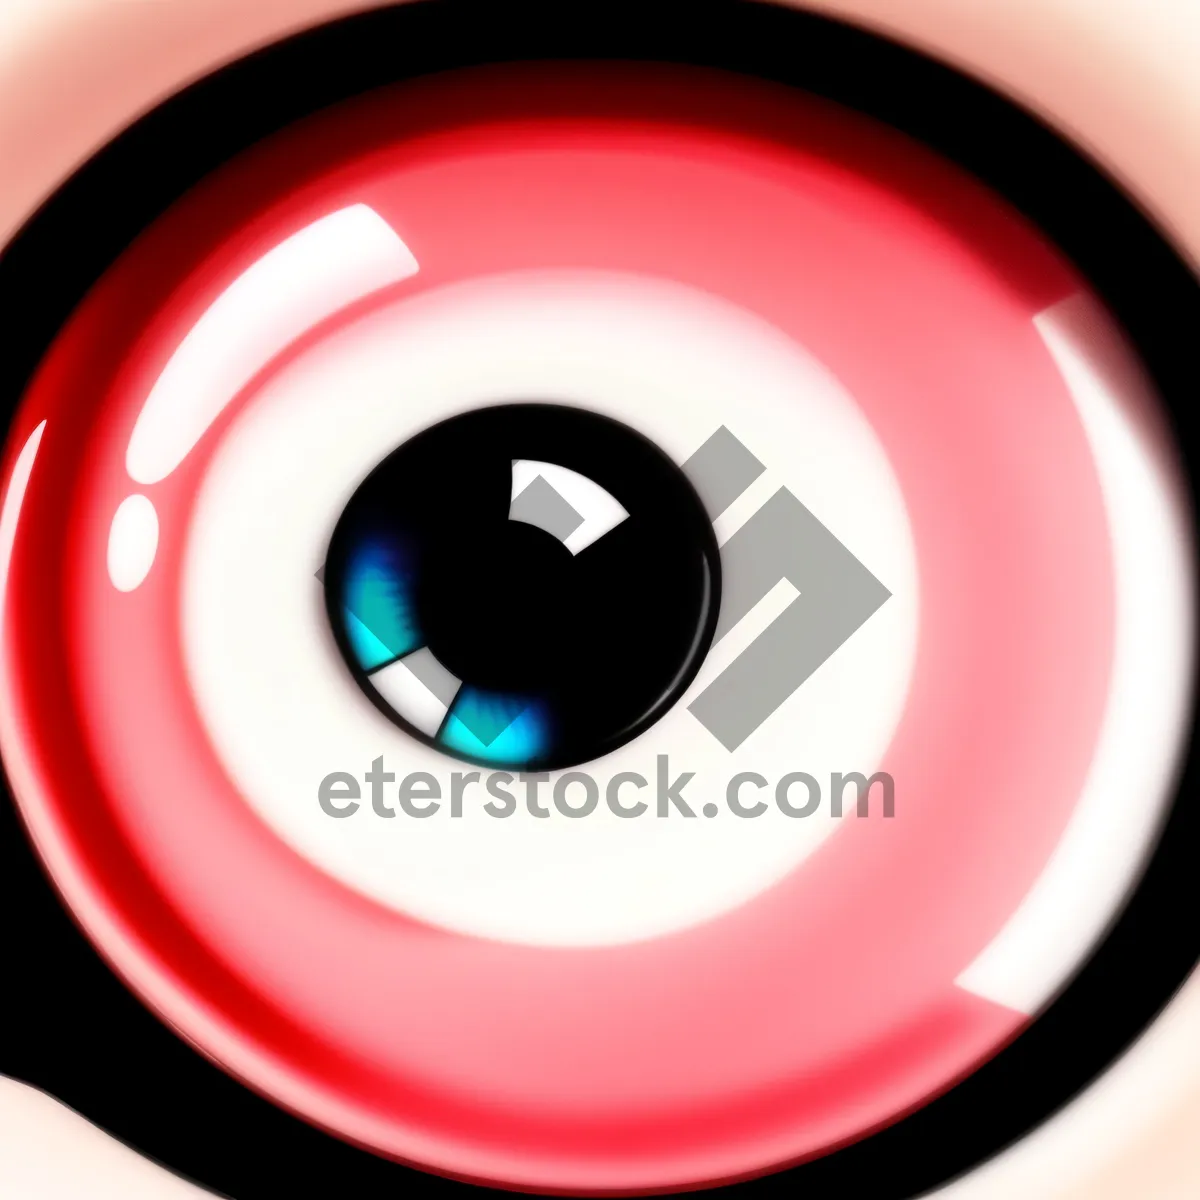 Picture of Metallic Shiny Circle Button with Reflection.